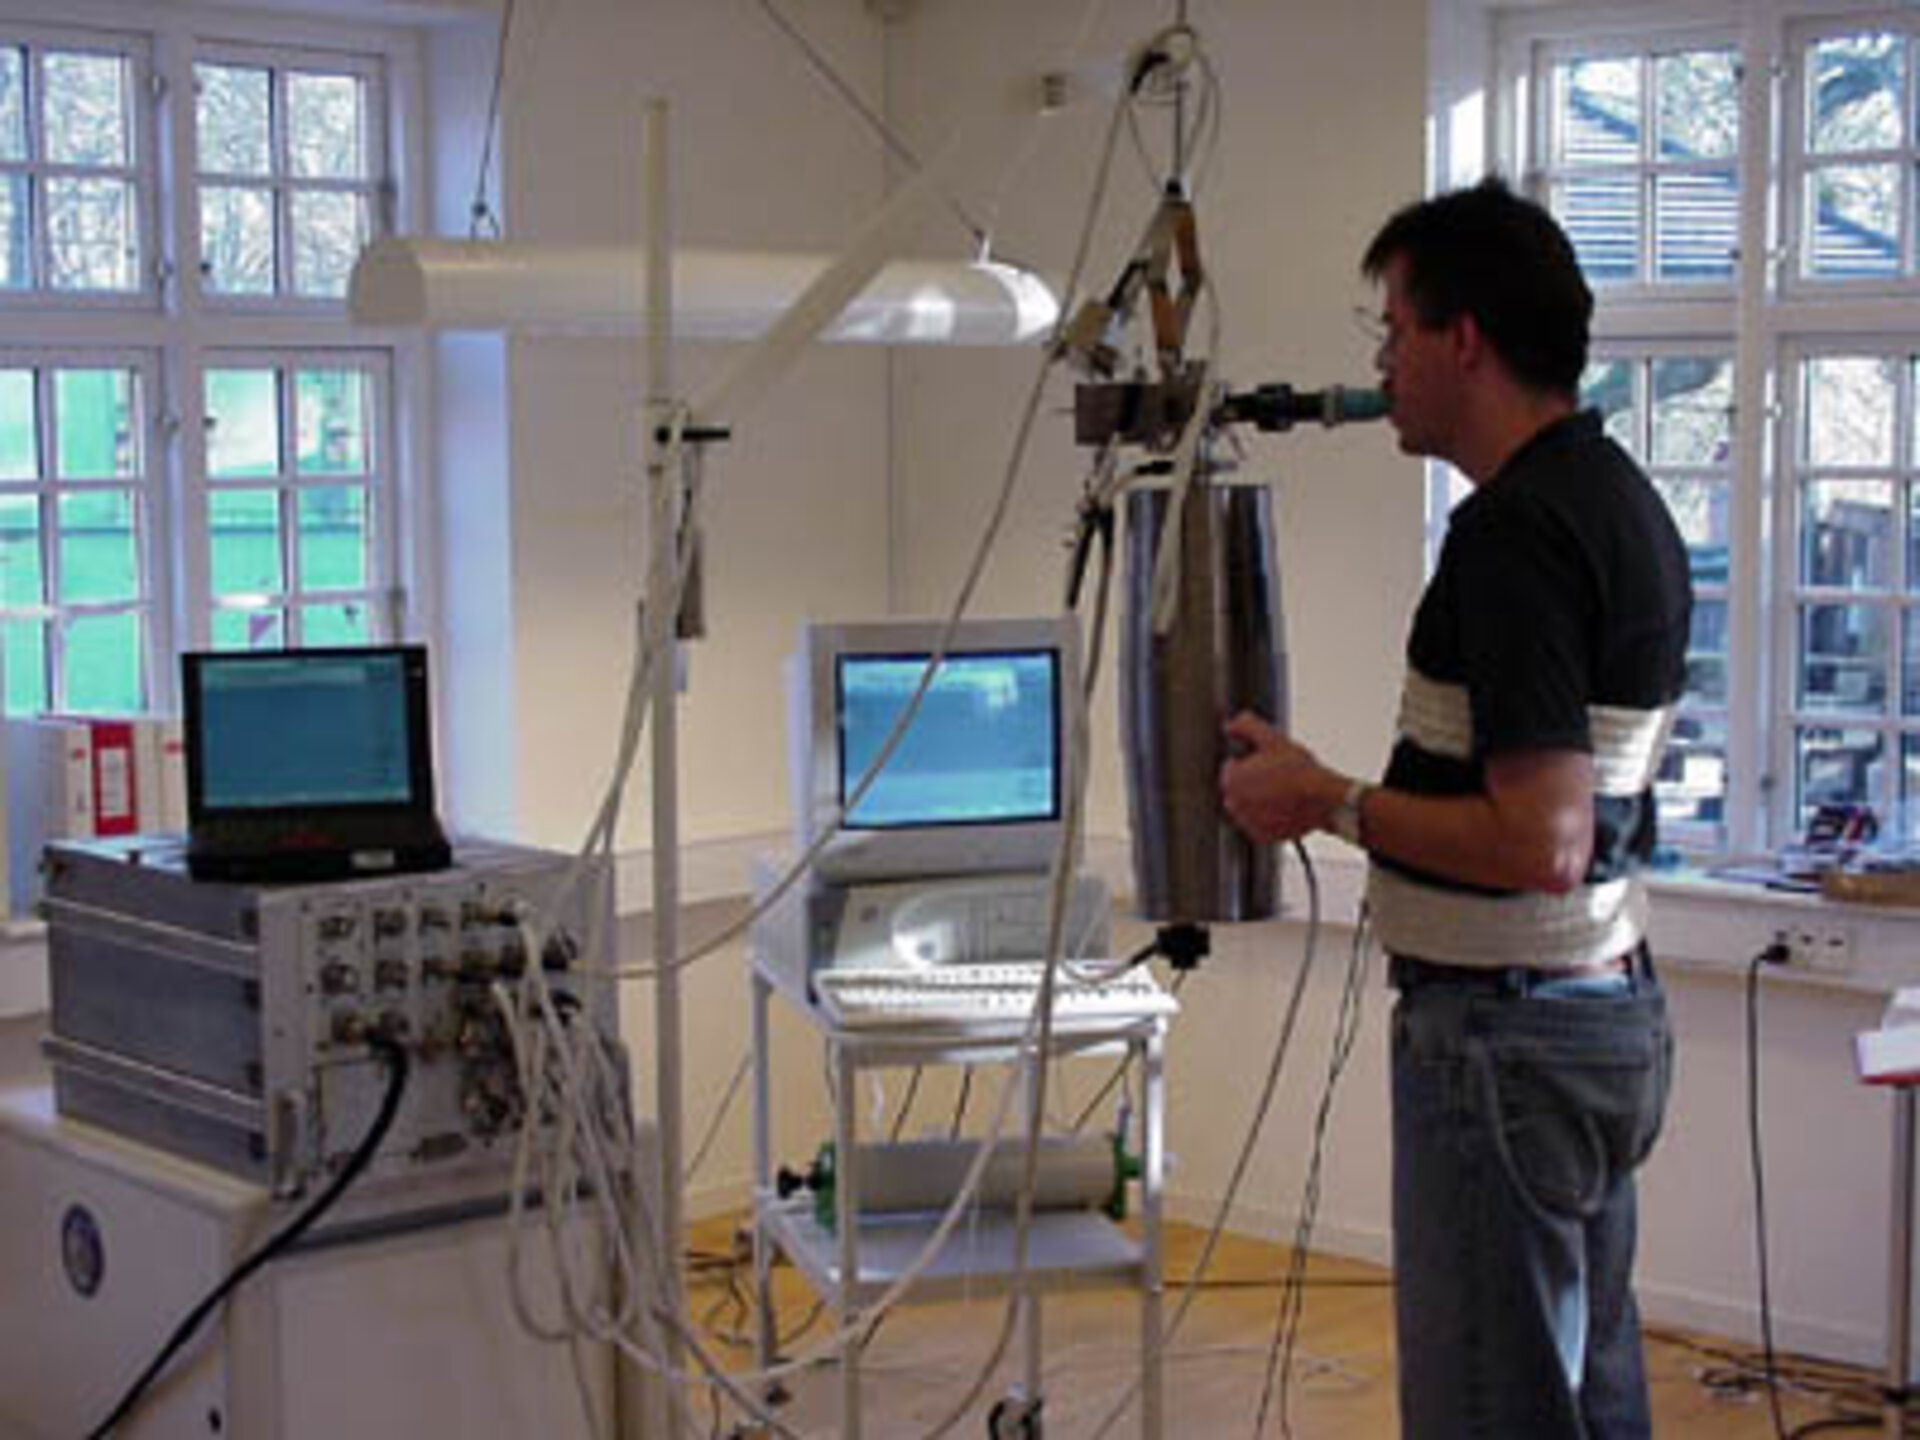 Part of the Pulmonary Function System was developed in Europe